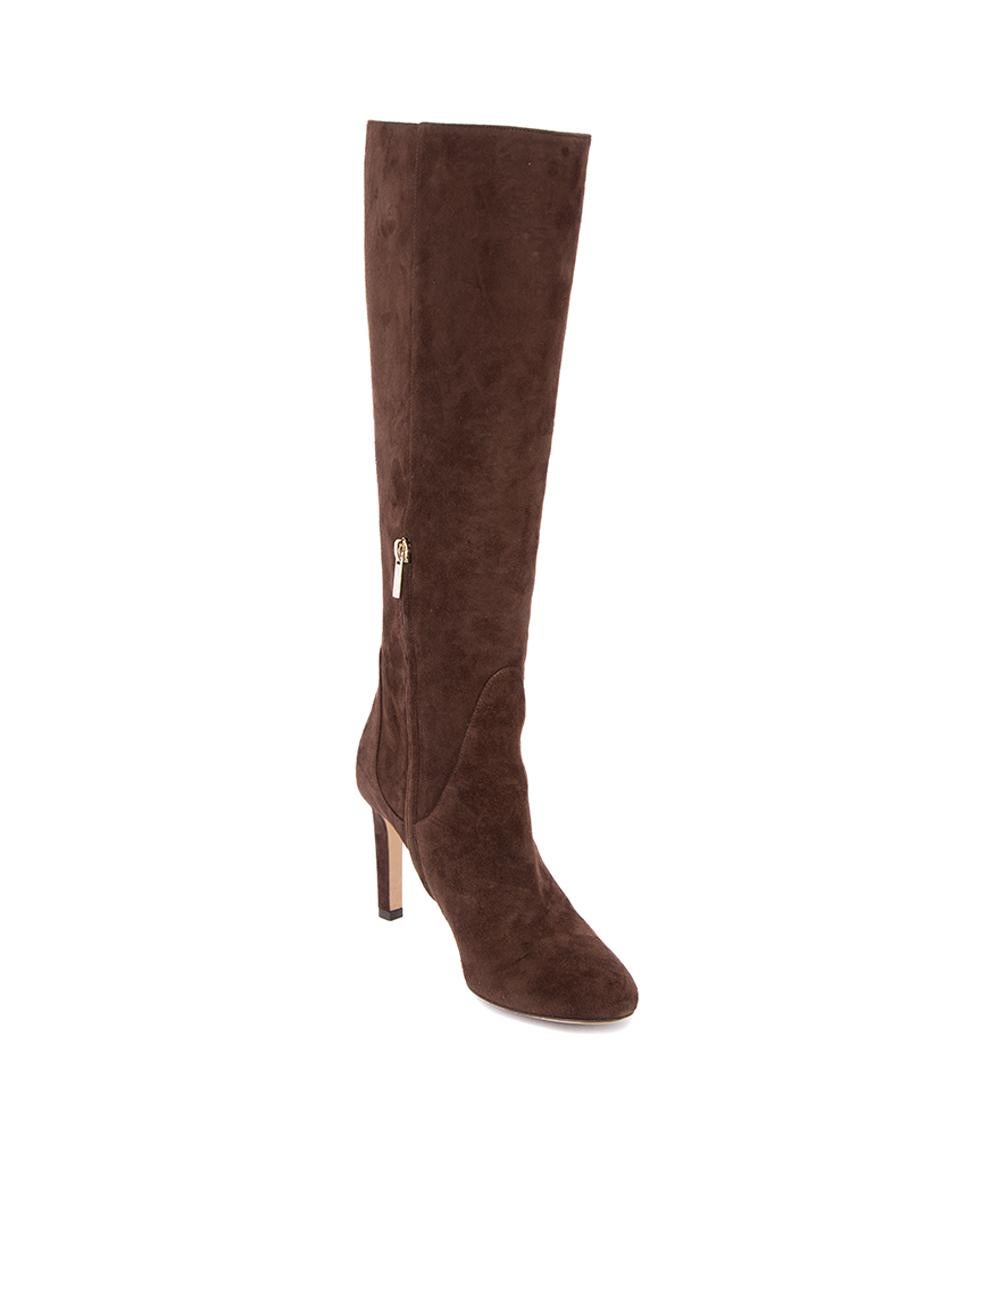 CONDITION is Very good. Minimal wear to boots is evident. Minimal wear to the suede exterior on this used Jimmy Choo designer resale item. This item includes the original dustbag and shoebox.
 
 Details
  Brown
 Suede
 Knee high boots
 Round toe
